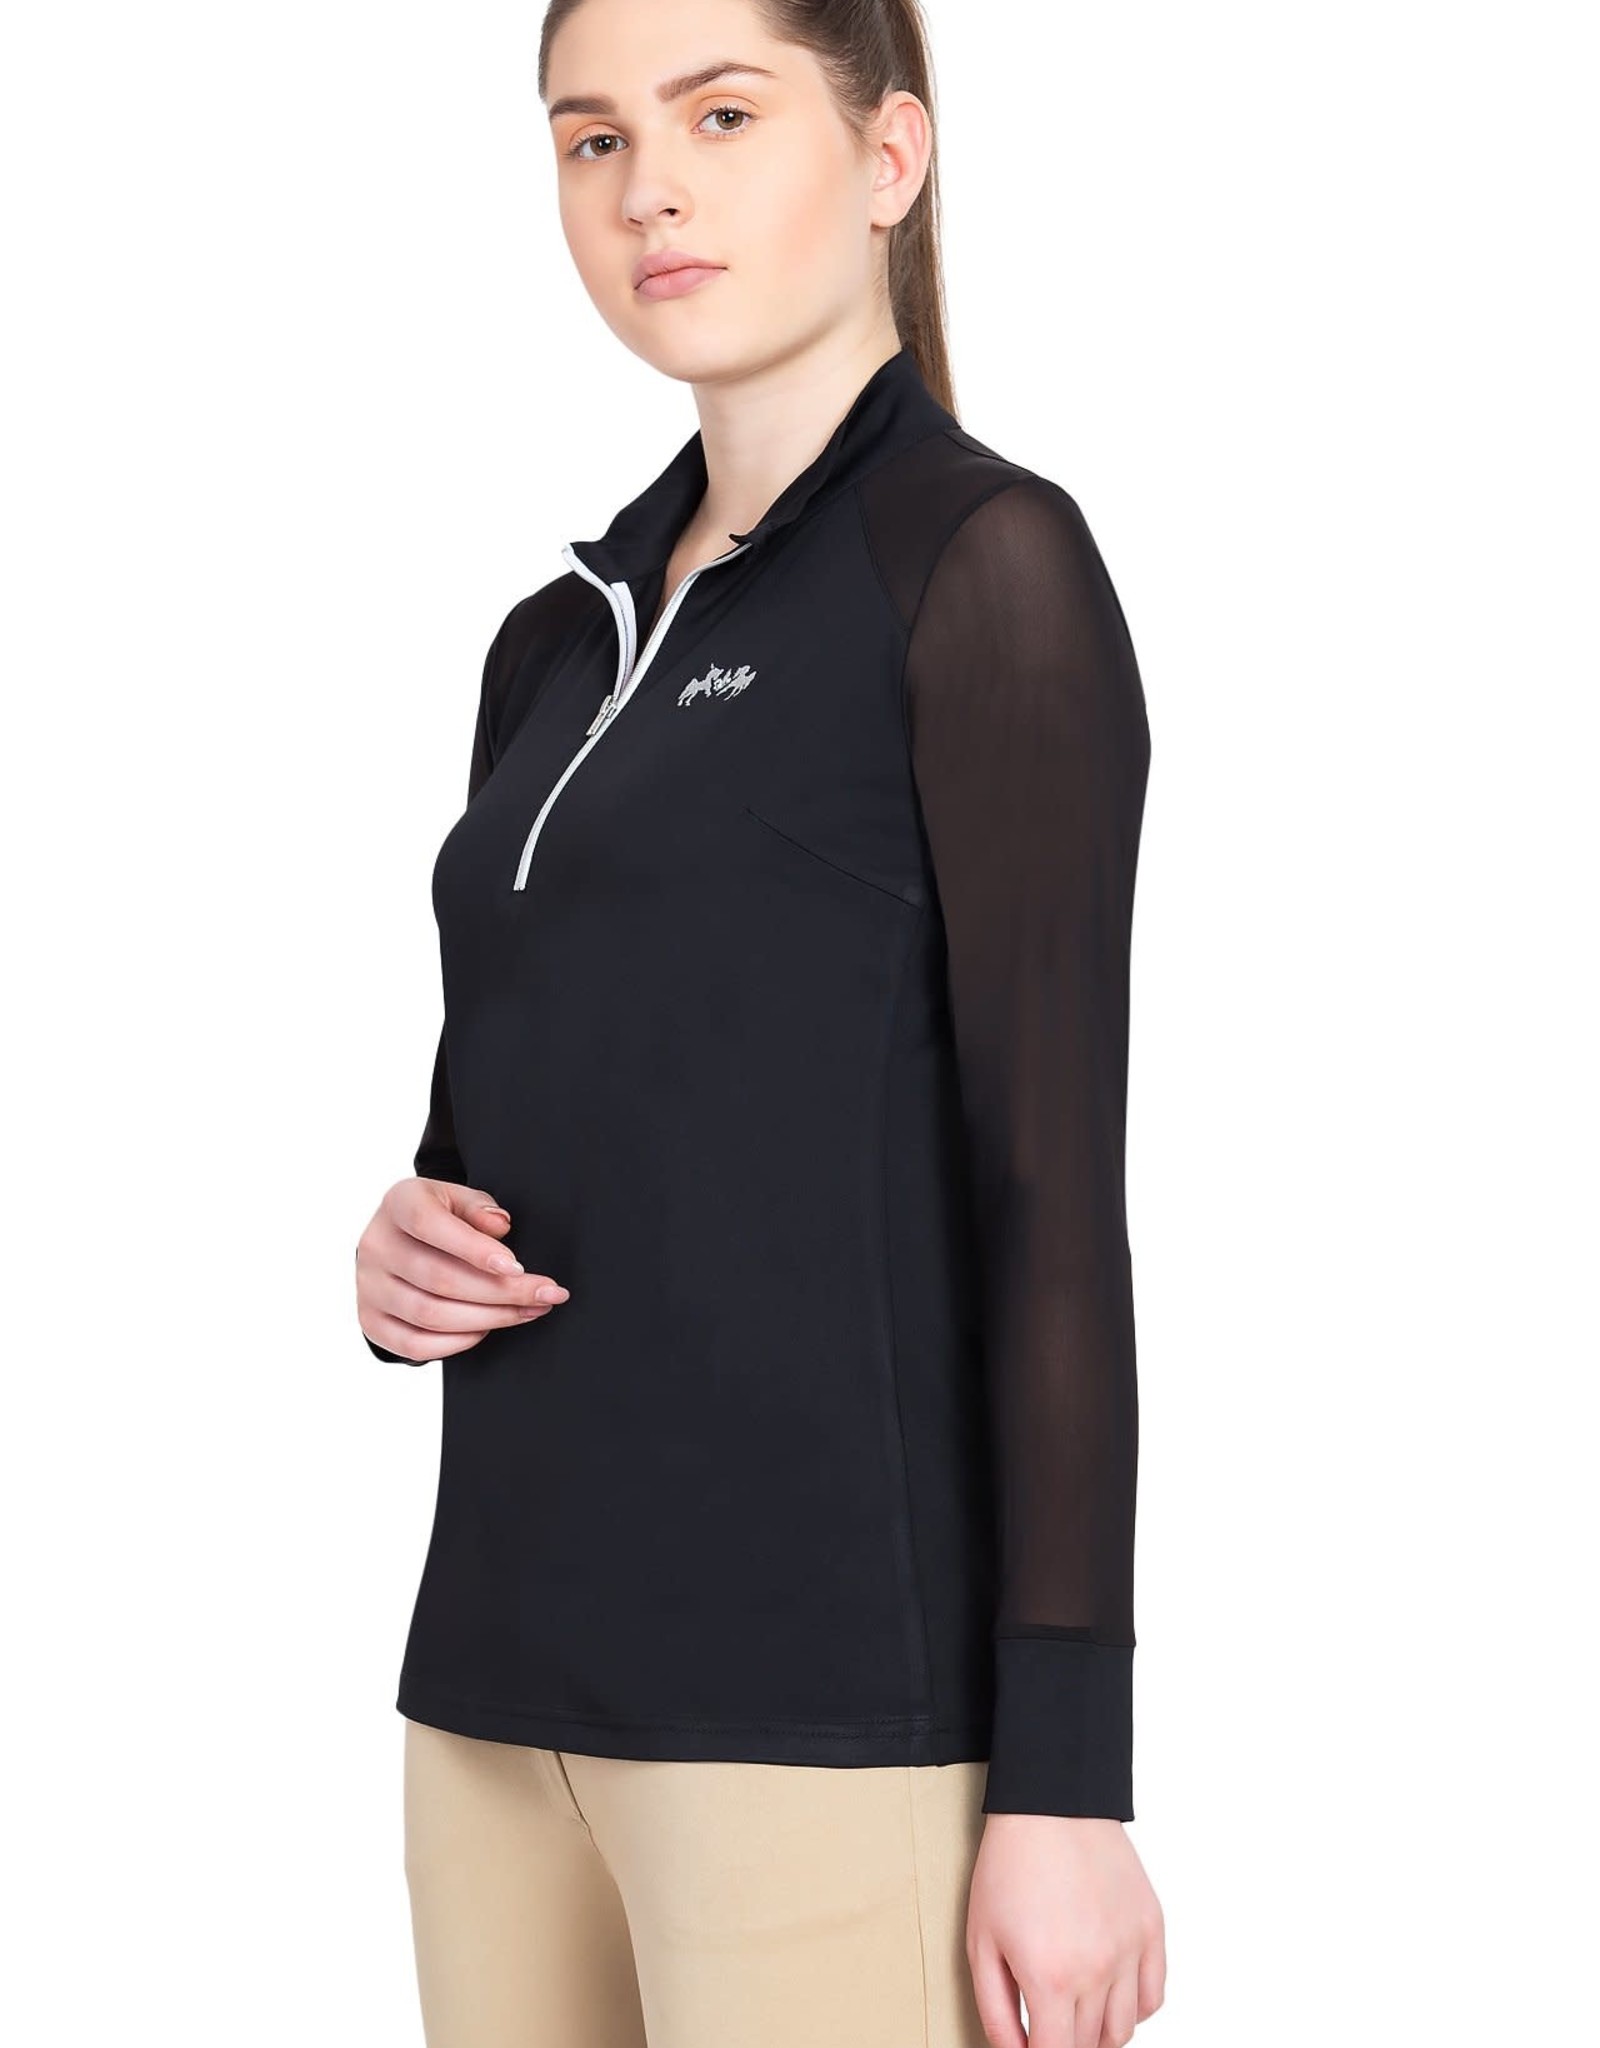 Equine Couture Ladies Erna EquiCool Long Sleeve Sport Shirt